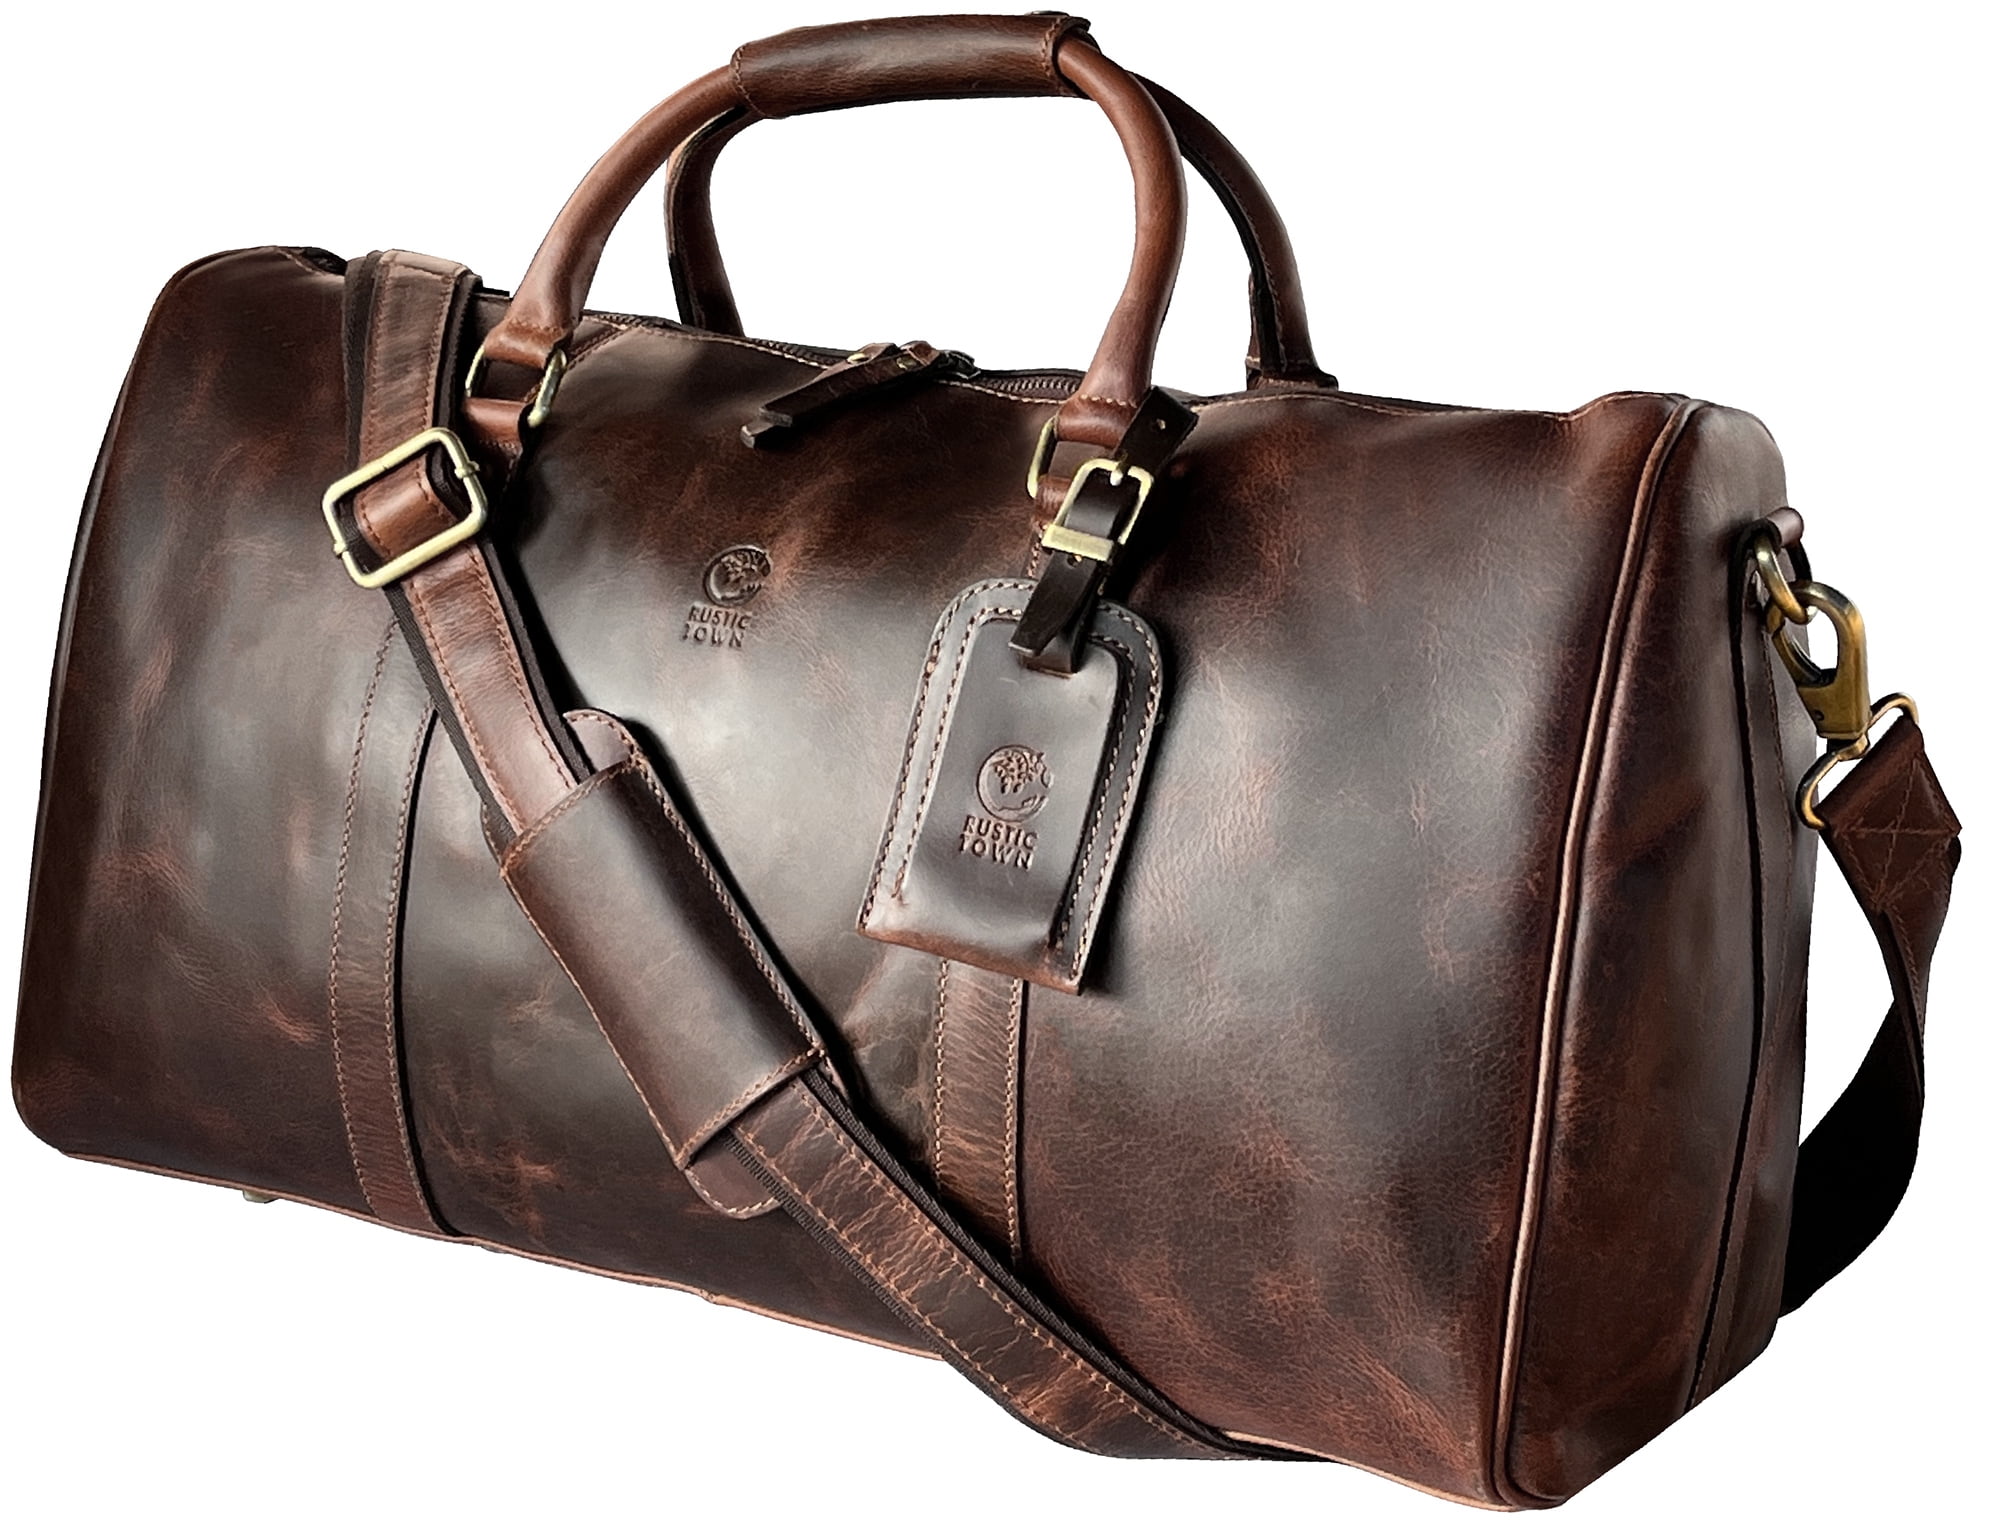 Men's duffle bags, discover the large collection from DRAKENSBERG